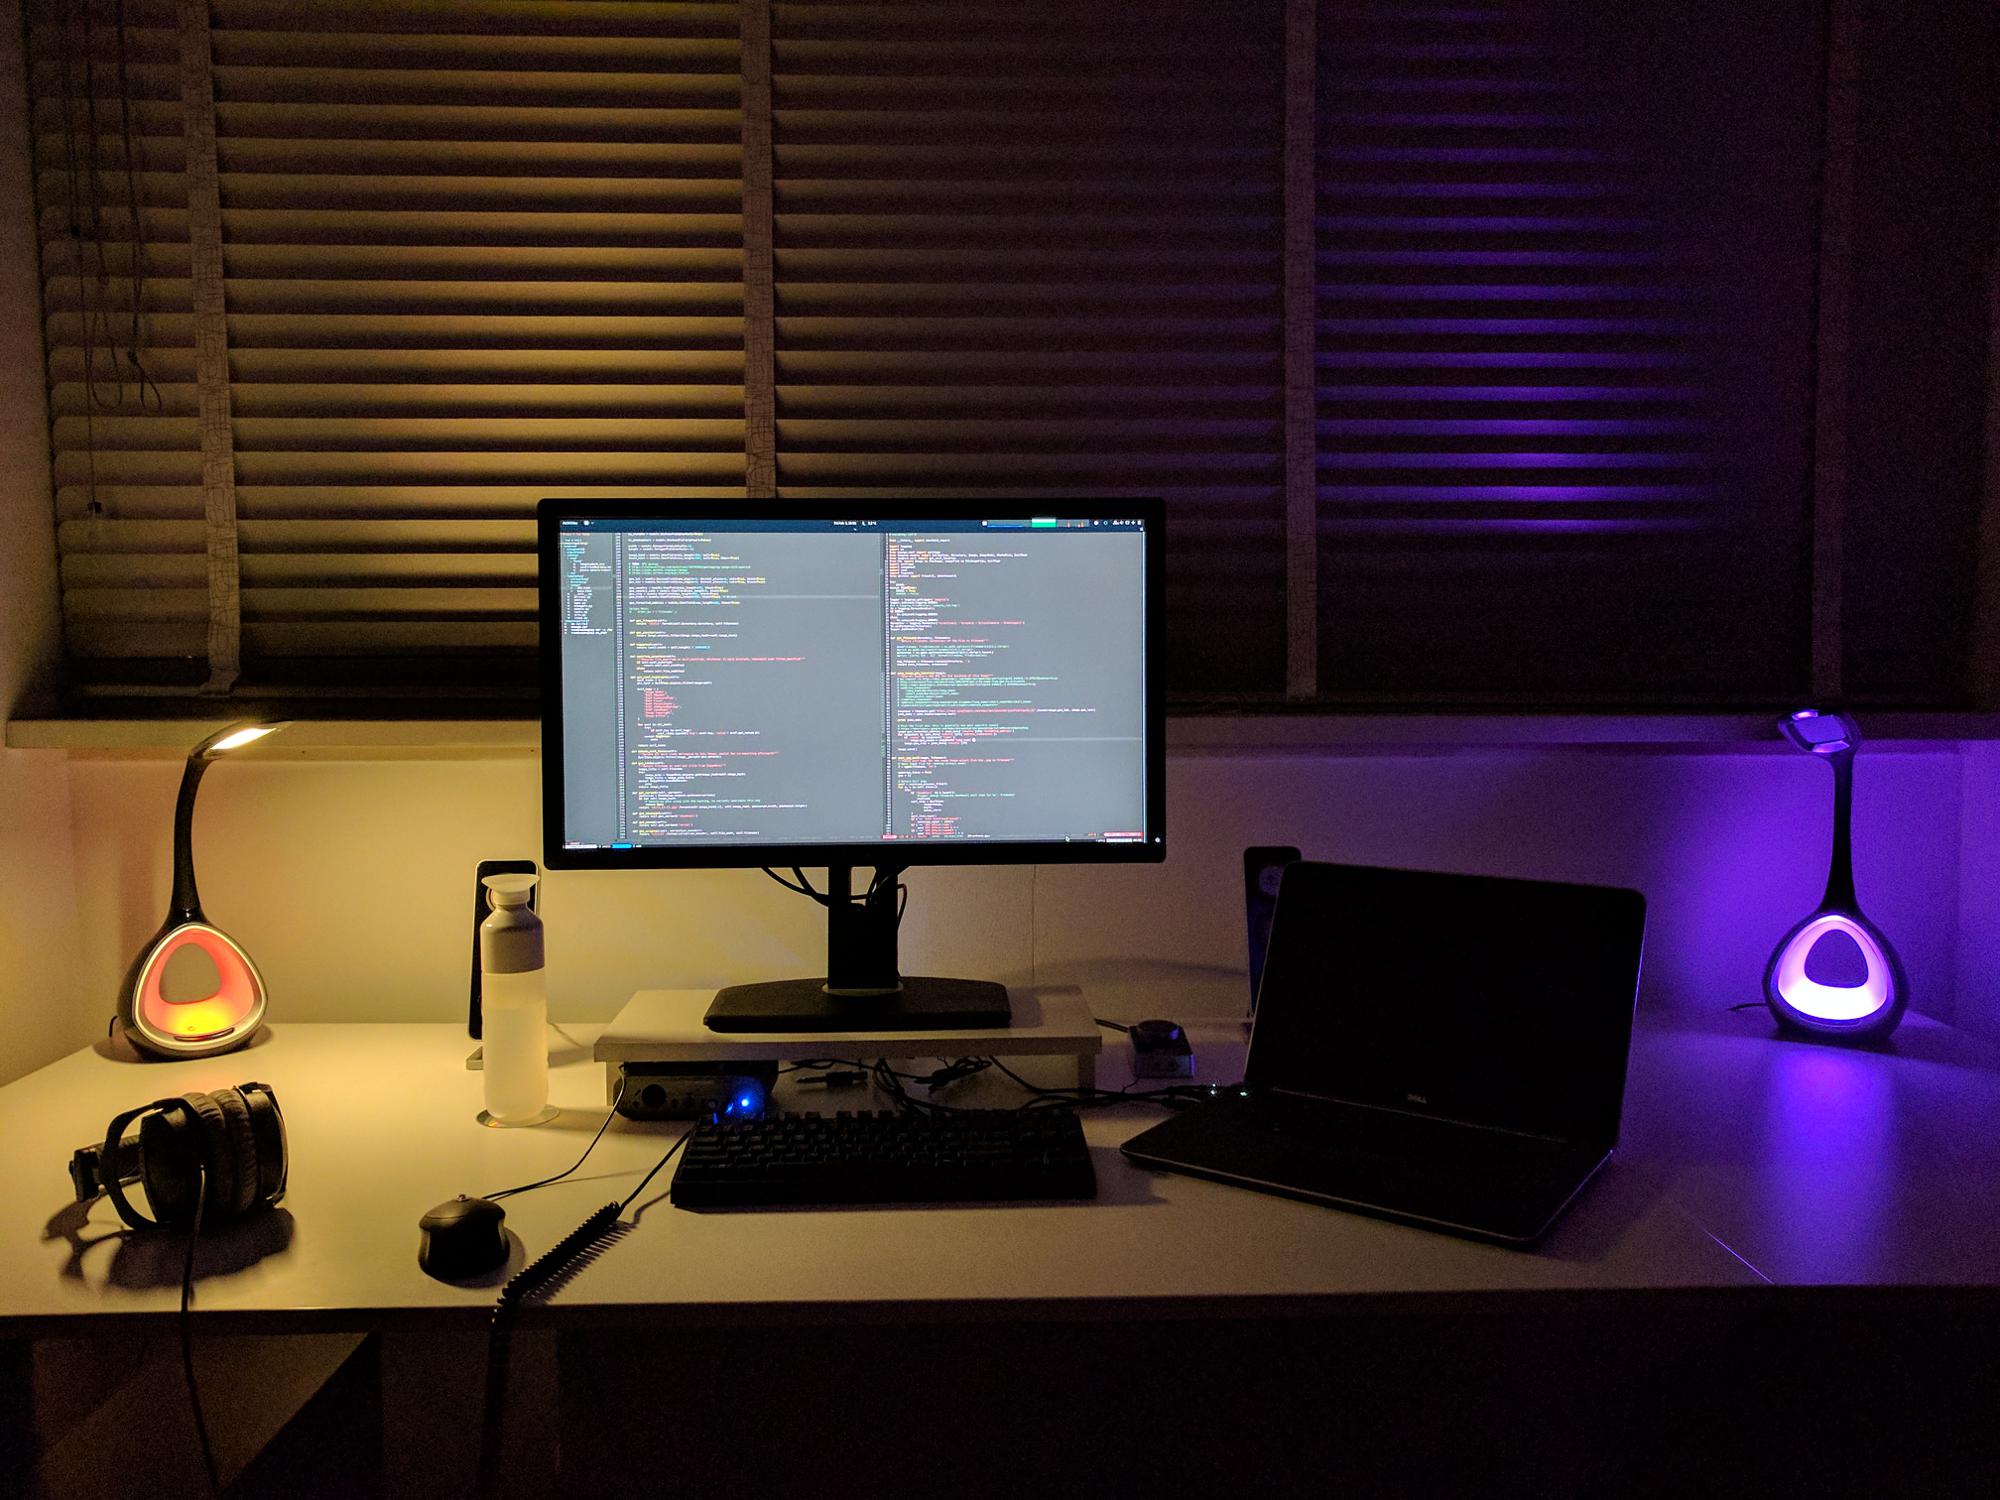 Clean desk with monitor, laptop, two colourful led lights, headphones